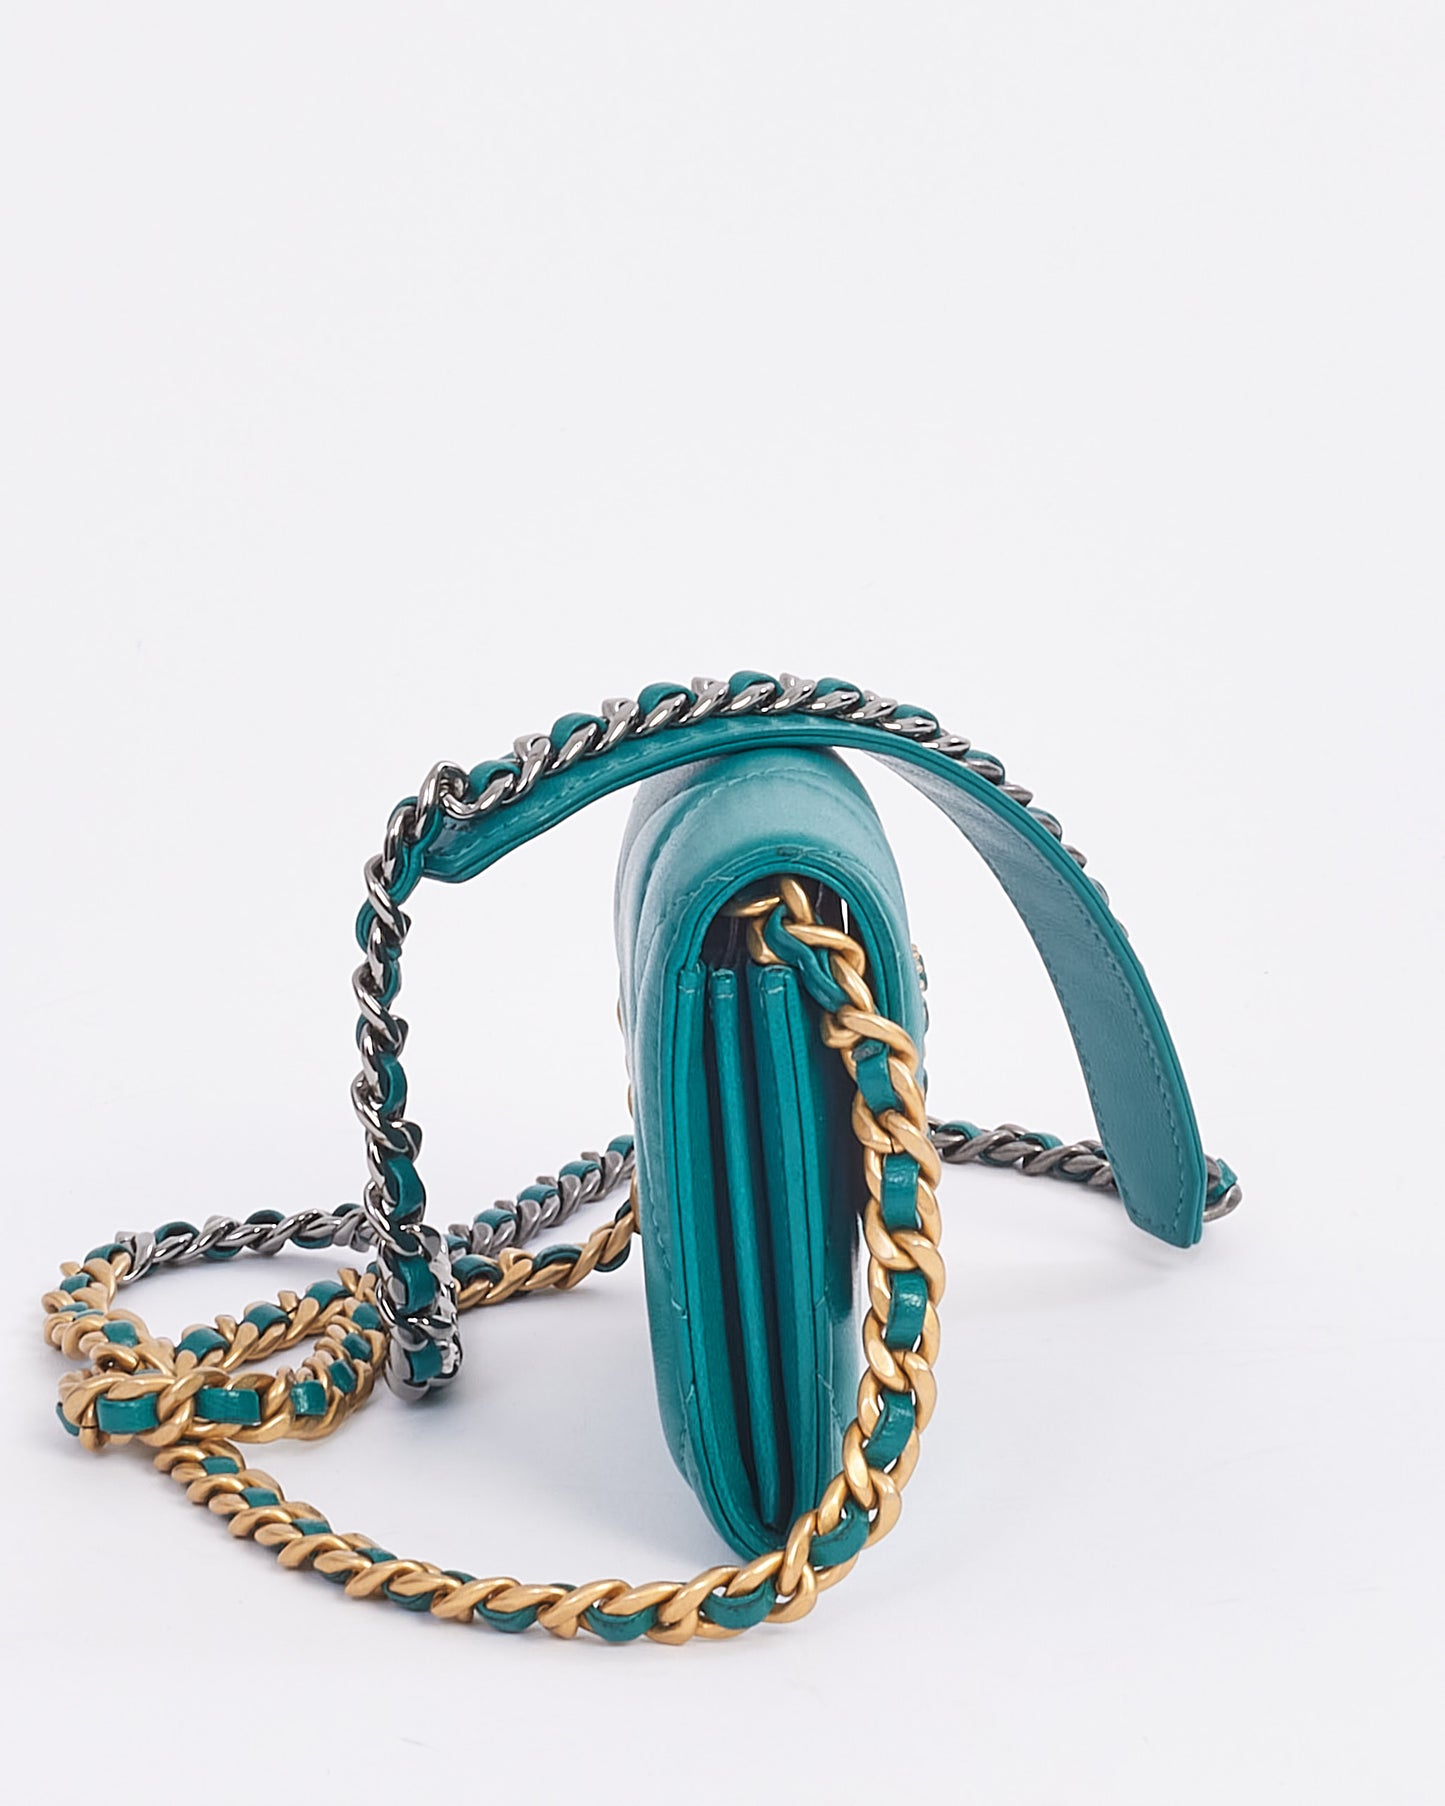 Chanel Turquoise Green 19 Coin Pouch on Chain